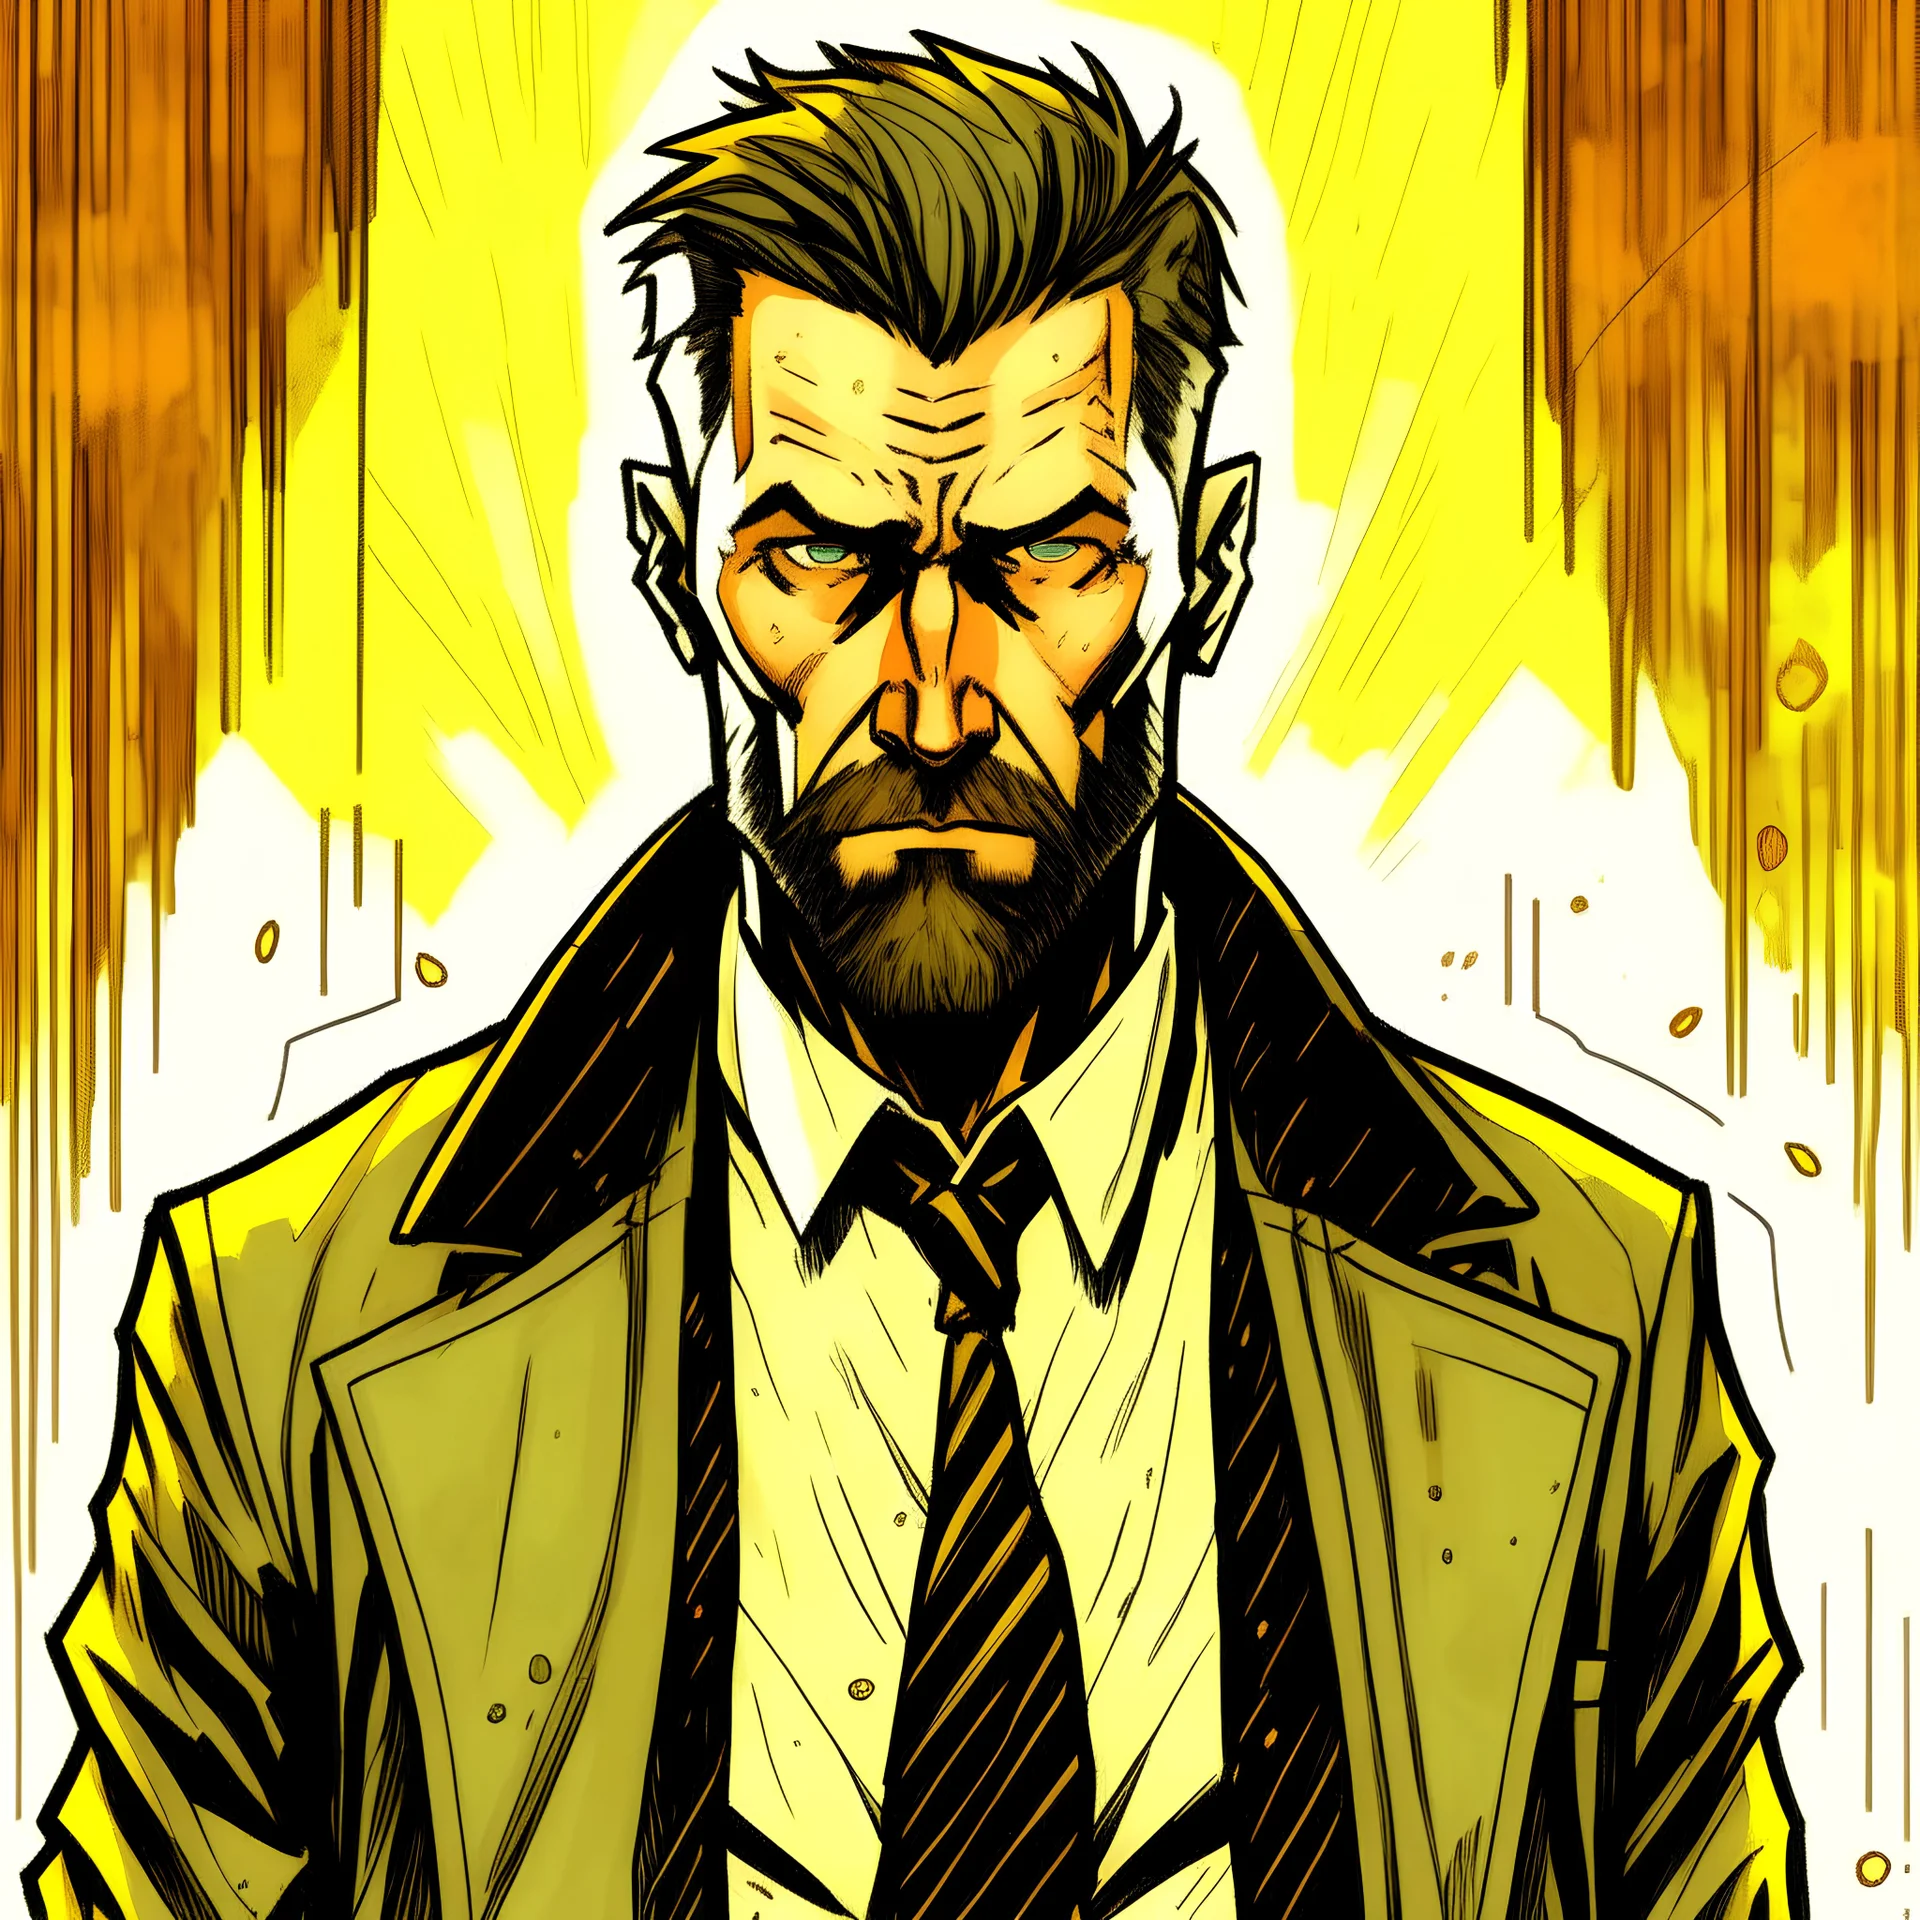 create an male character based on john constantine, fatter, older, dark brown short hair and long beard, flat background, no jacket and black tie, larger jaw, realistic